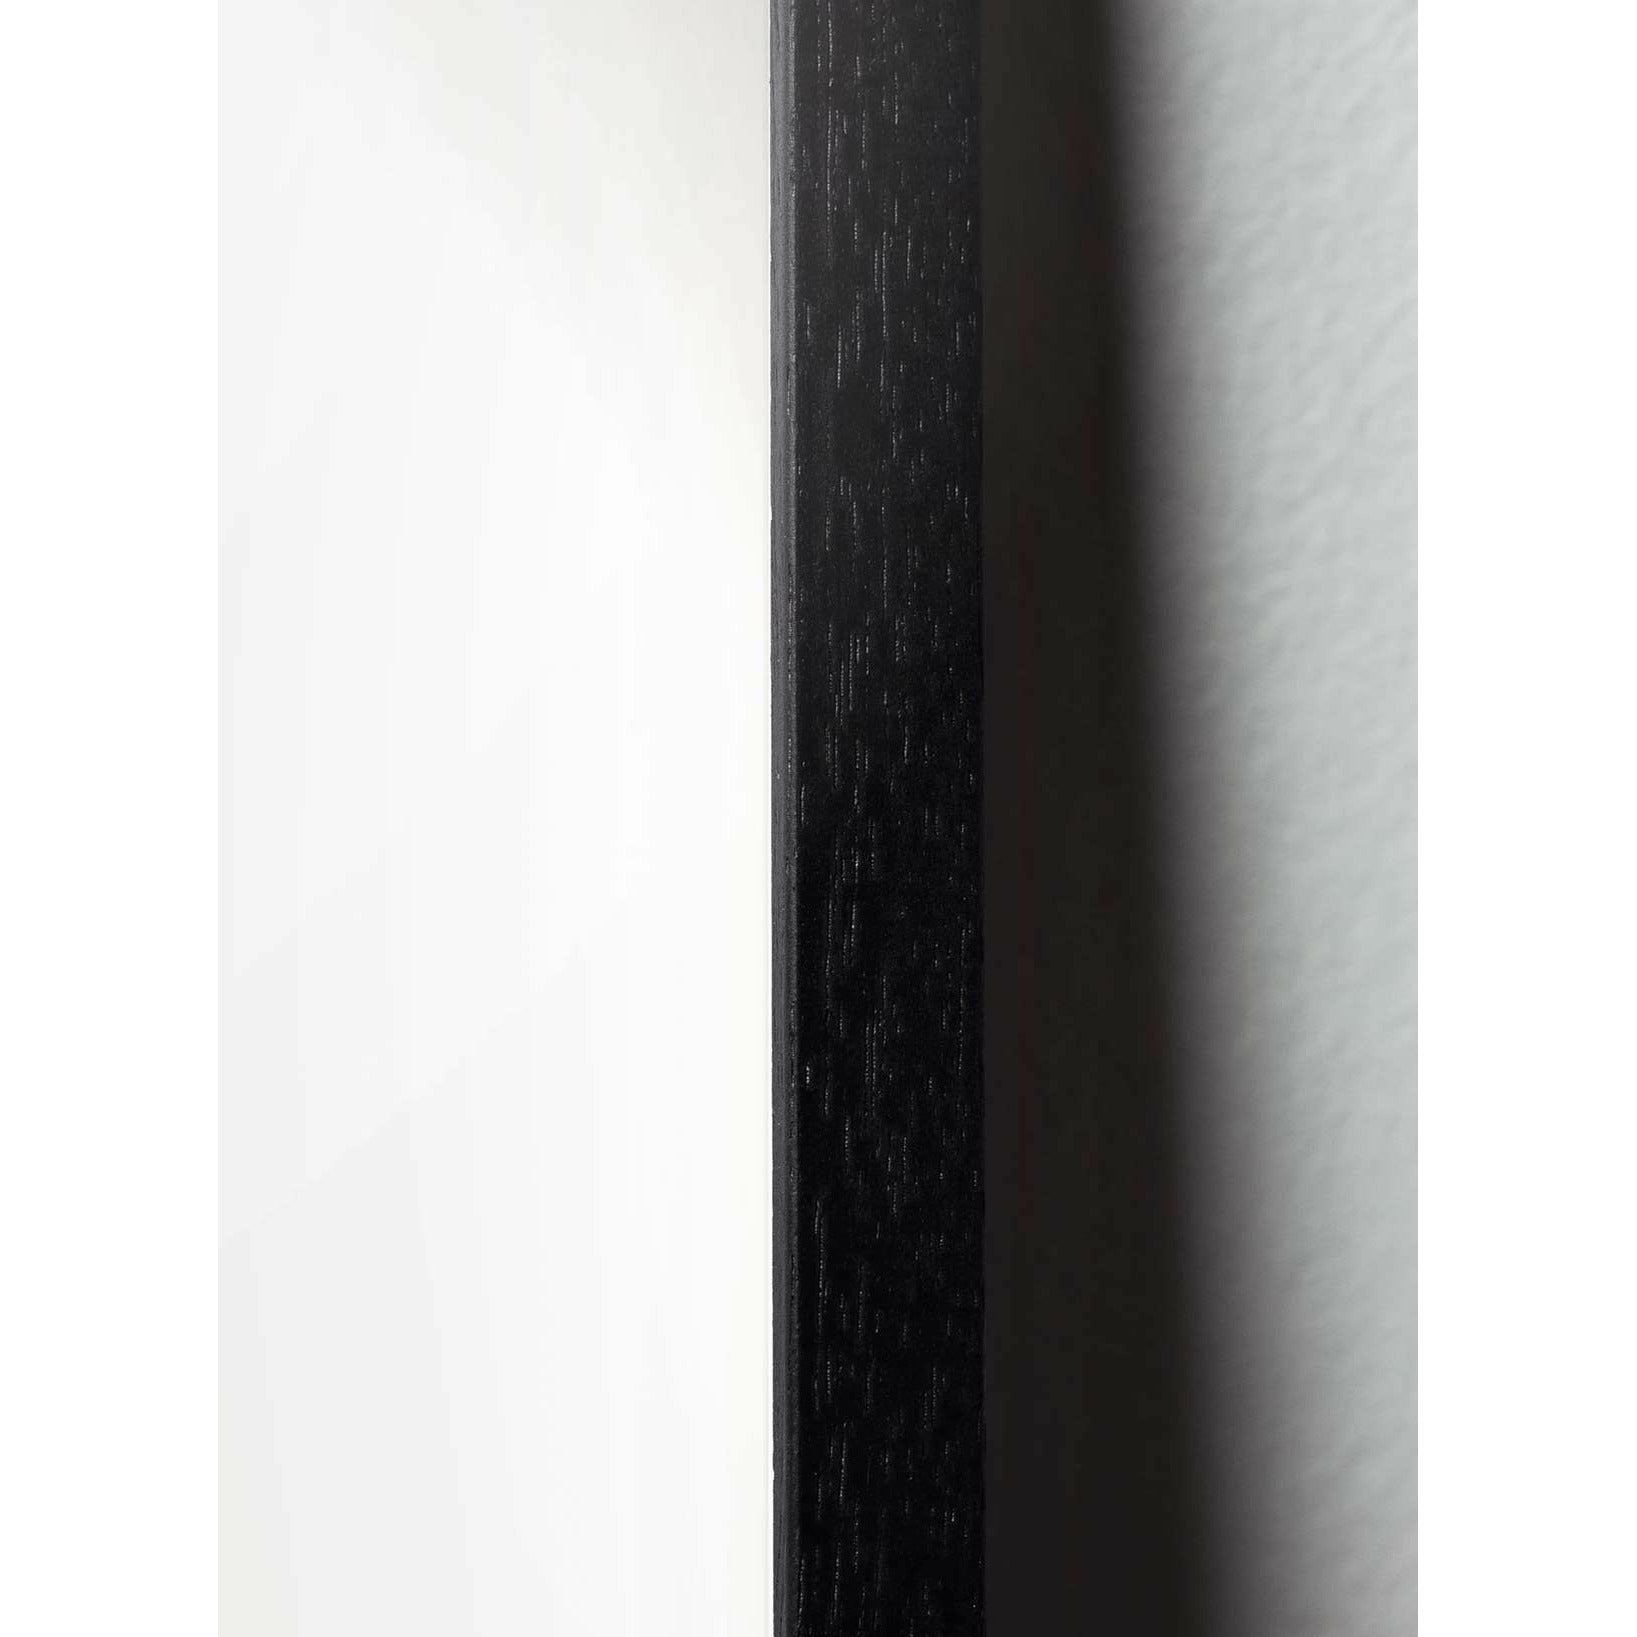 Brainchild Eierparade Poster, Frame Made Of Black Lacquered Wood, 50x70 Cm